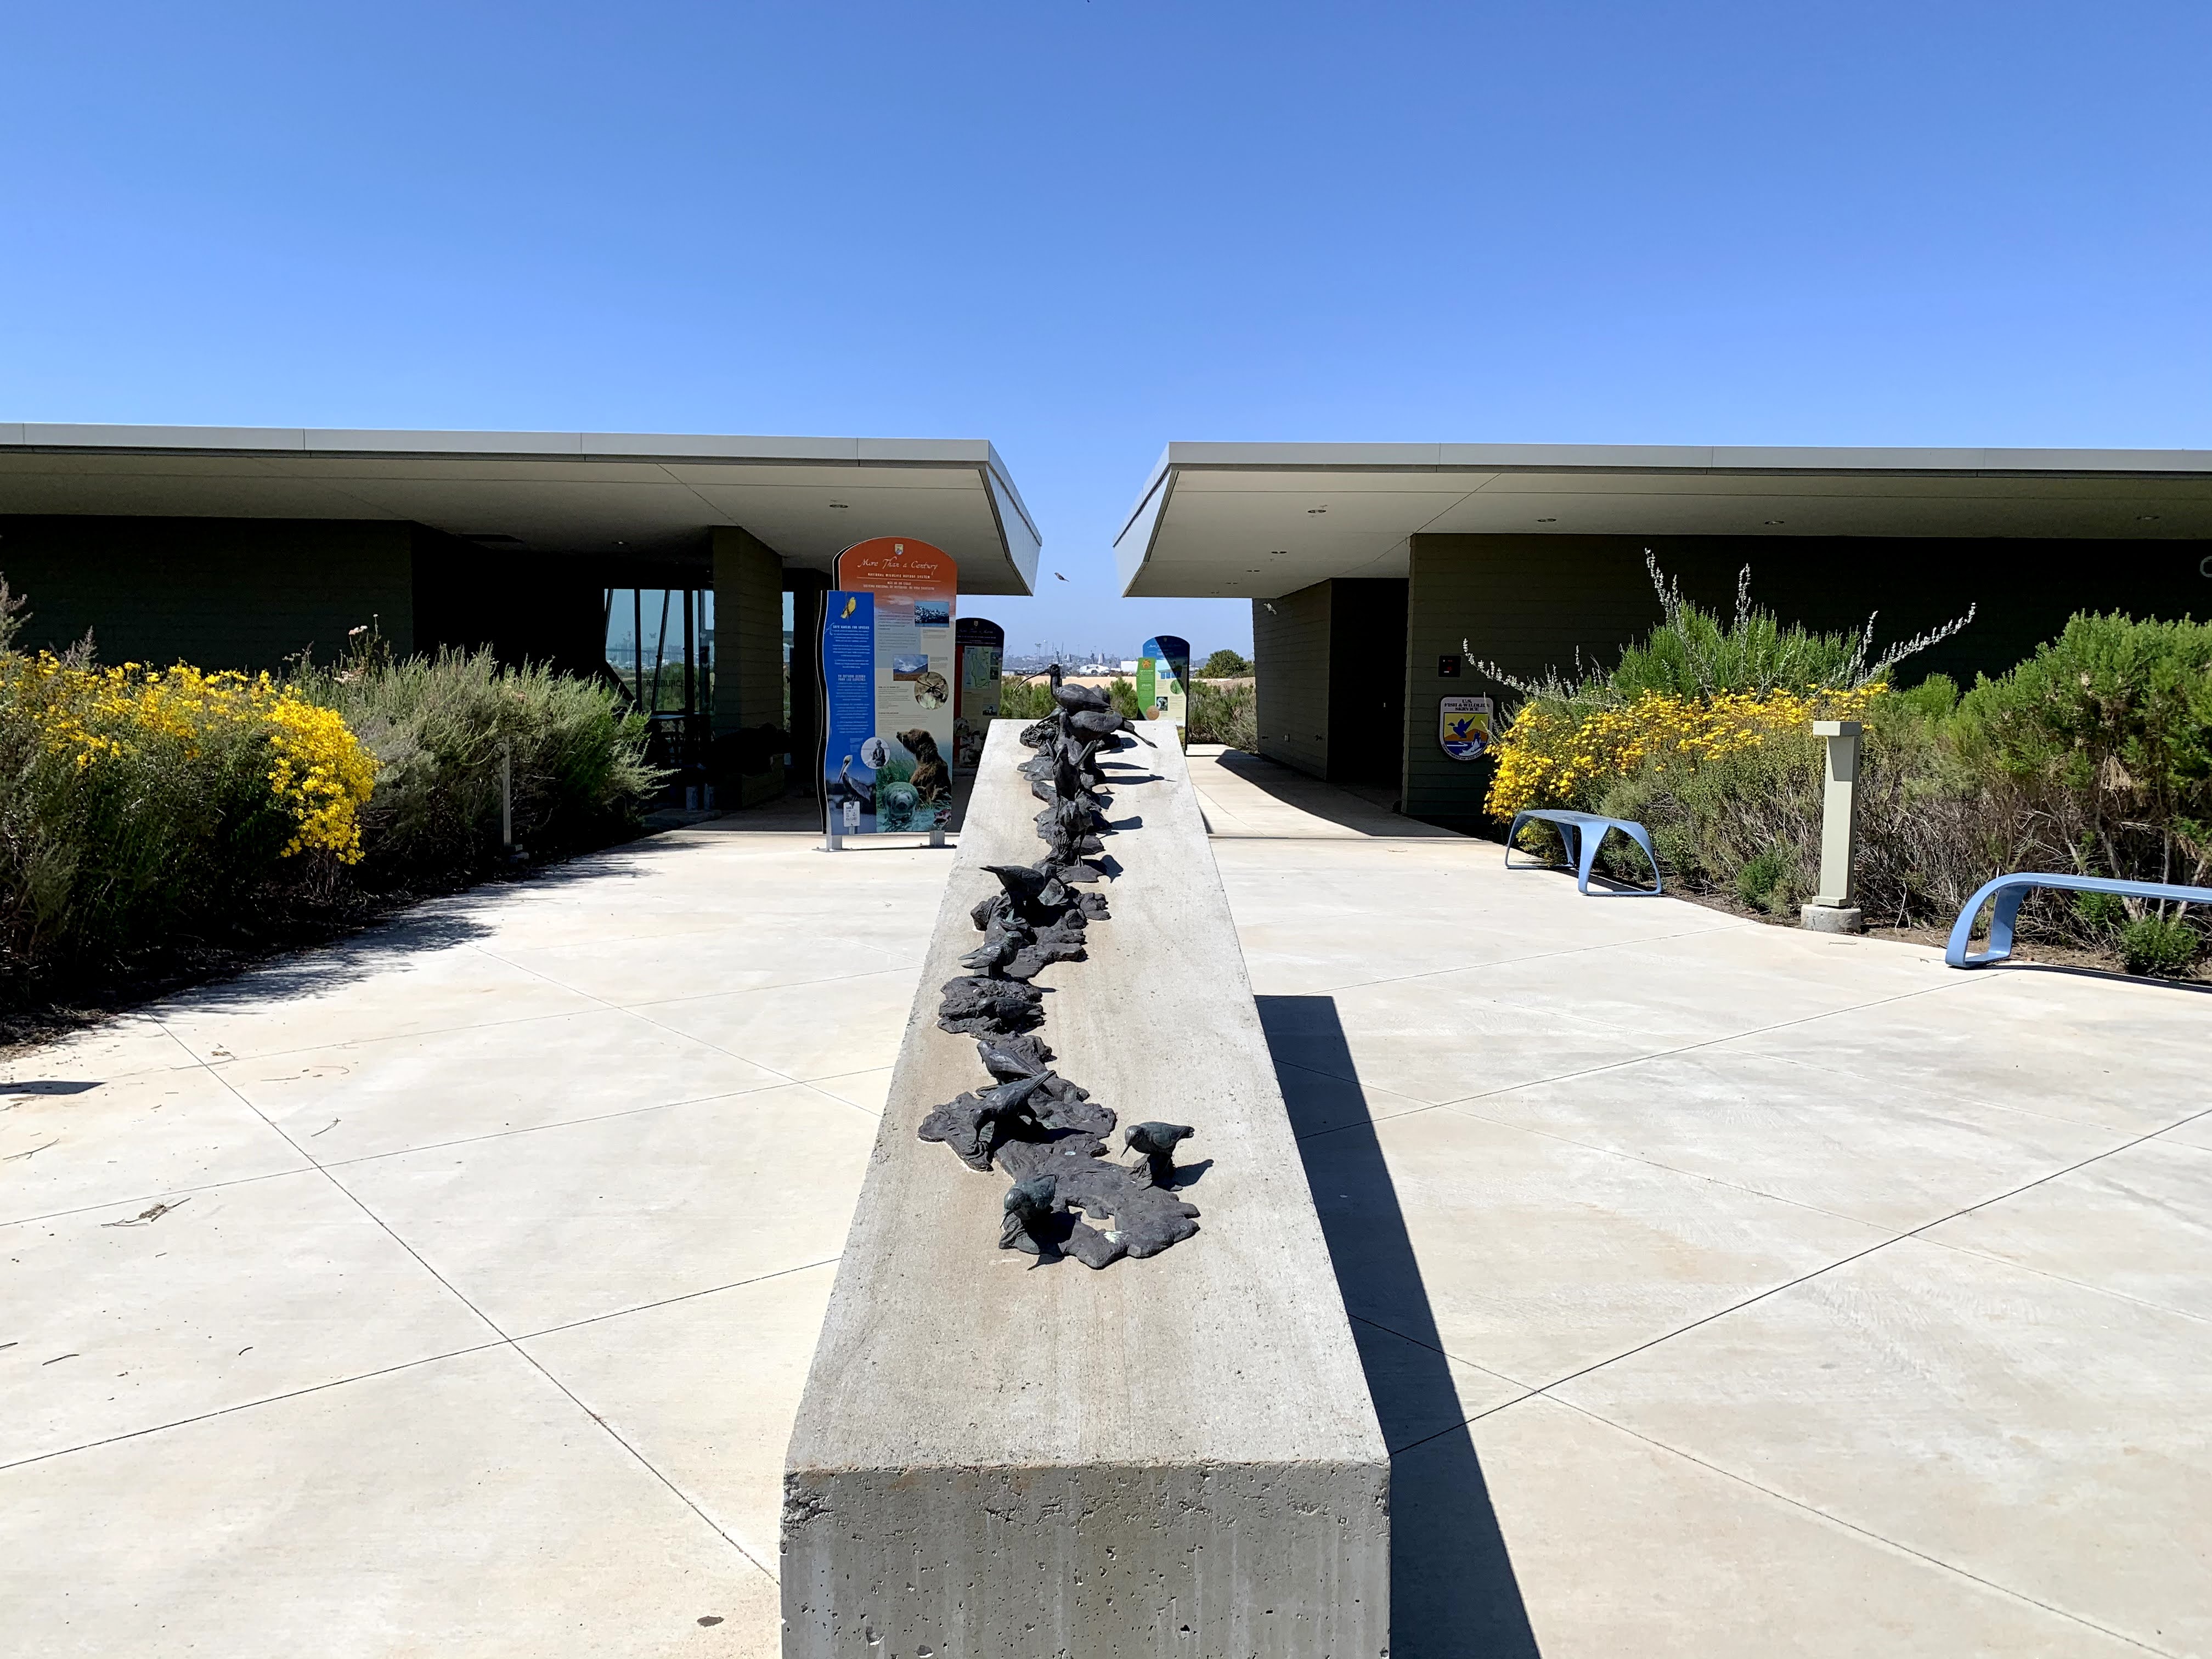 Two buildings with breezeway in between. A block with metal birds is in front of the buildings. 